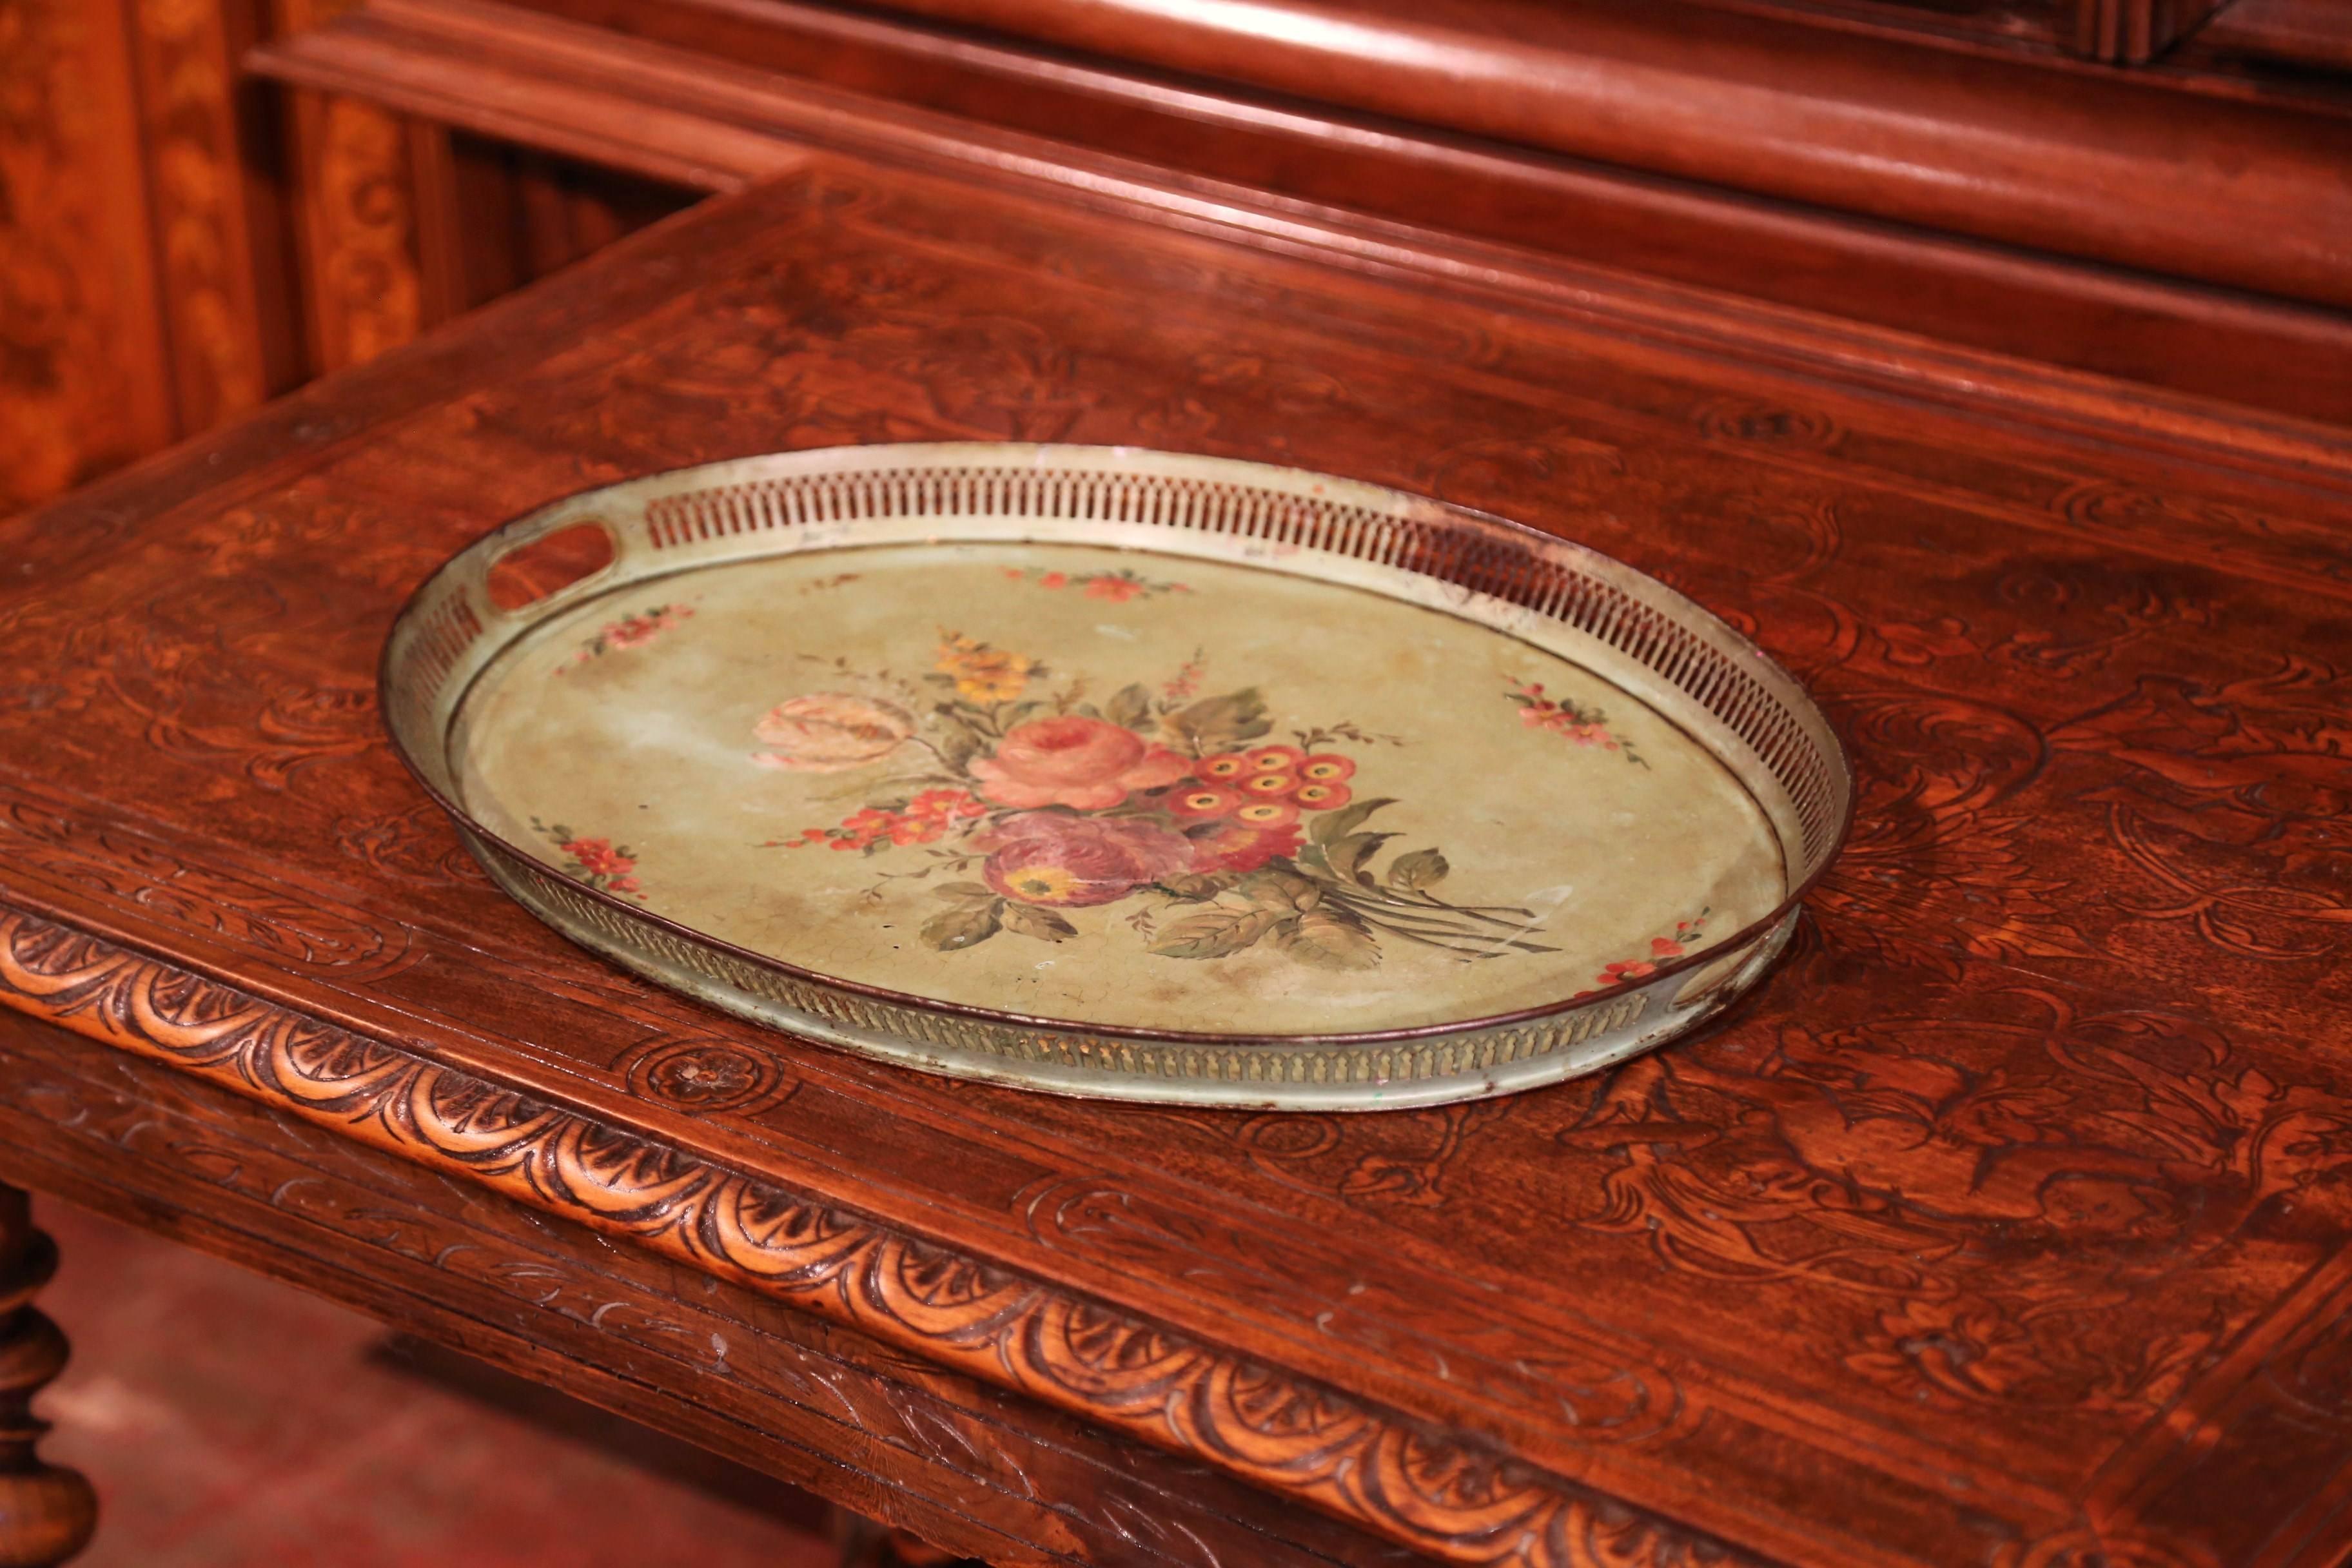 This antique gallery tray was created in Normandy, France, circa 1870; oval in shape, the colorful tray features two handles around the perimeter further embellished by hand painted floral and leaf motifs in the red and orange palette on a light